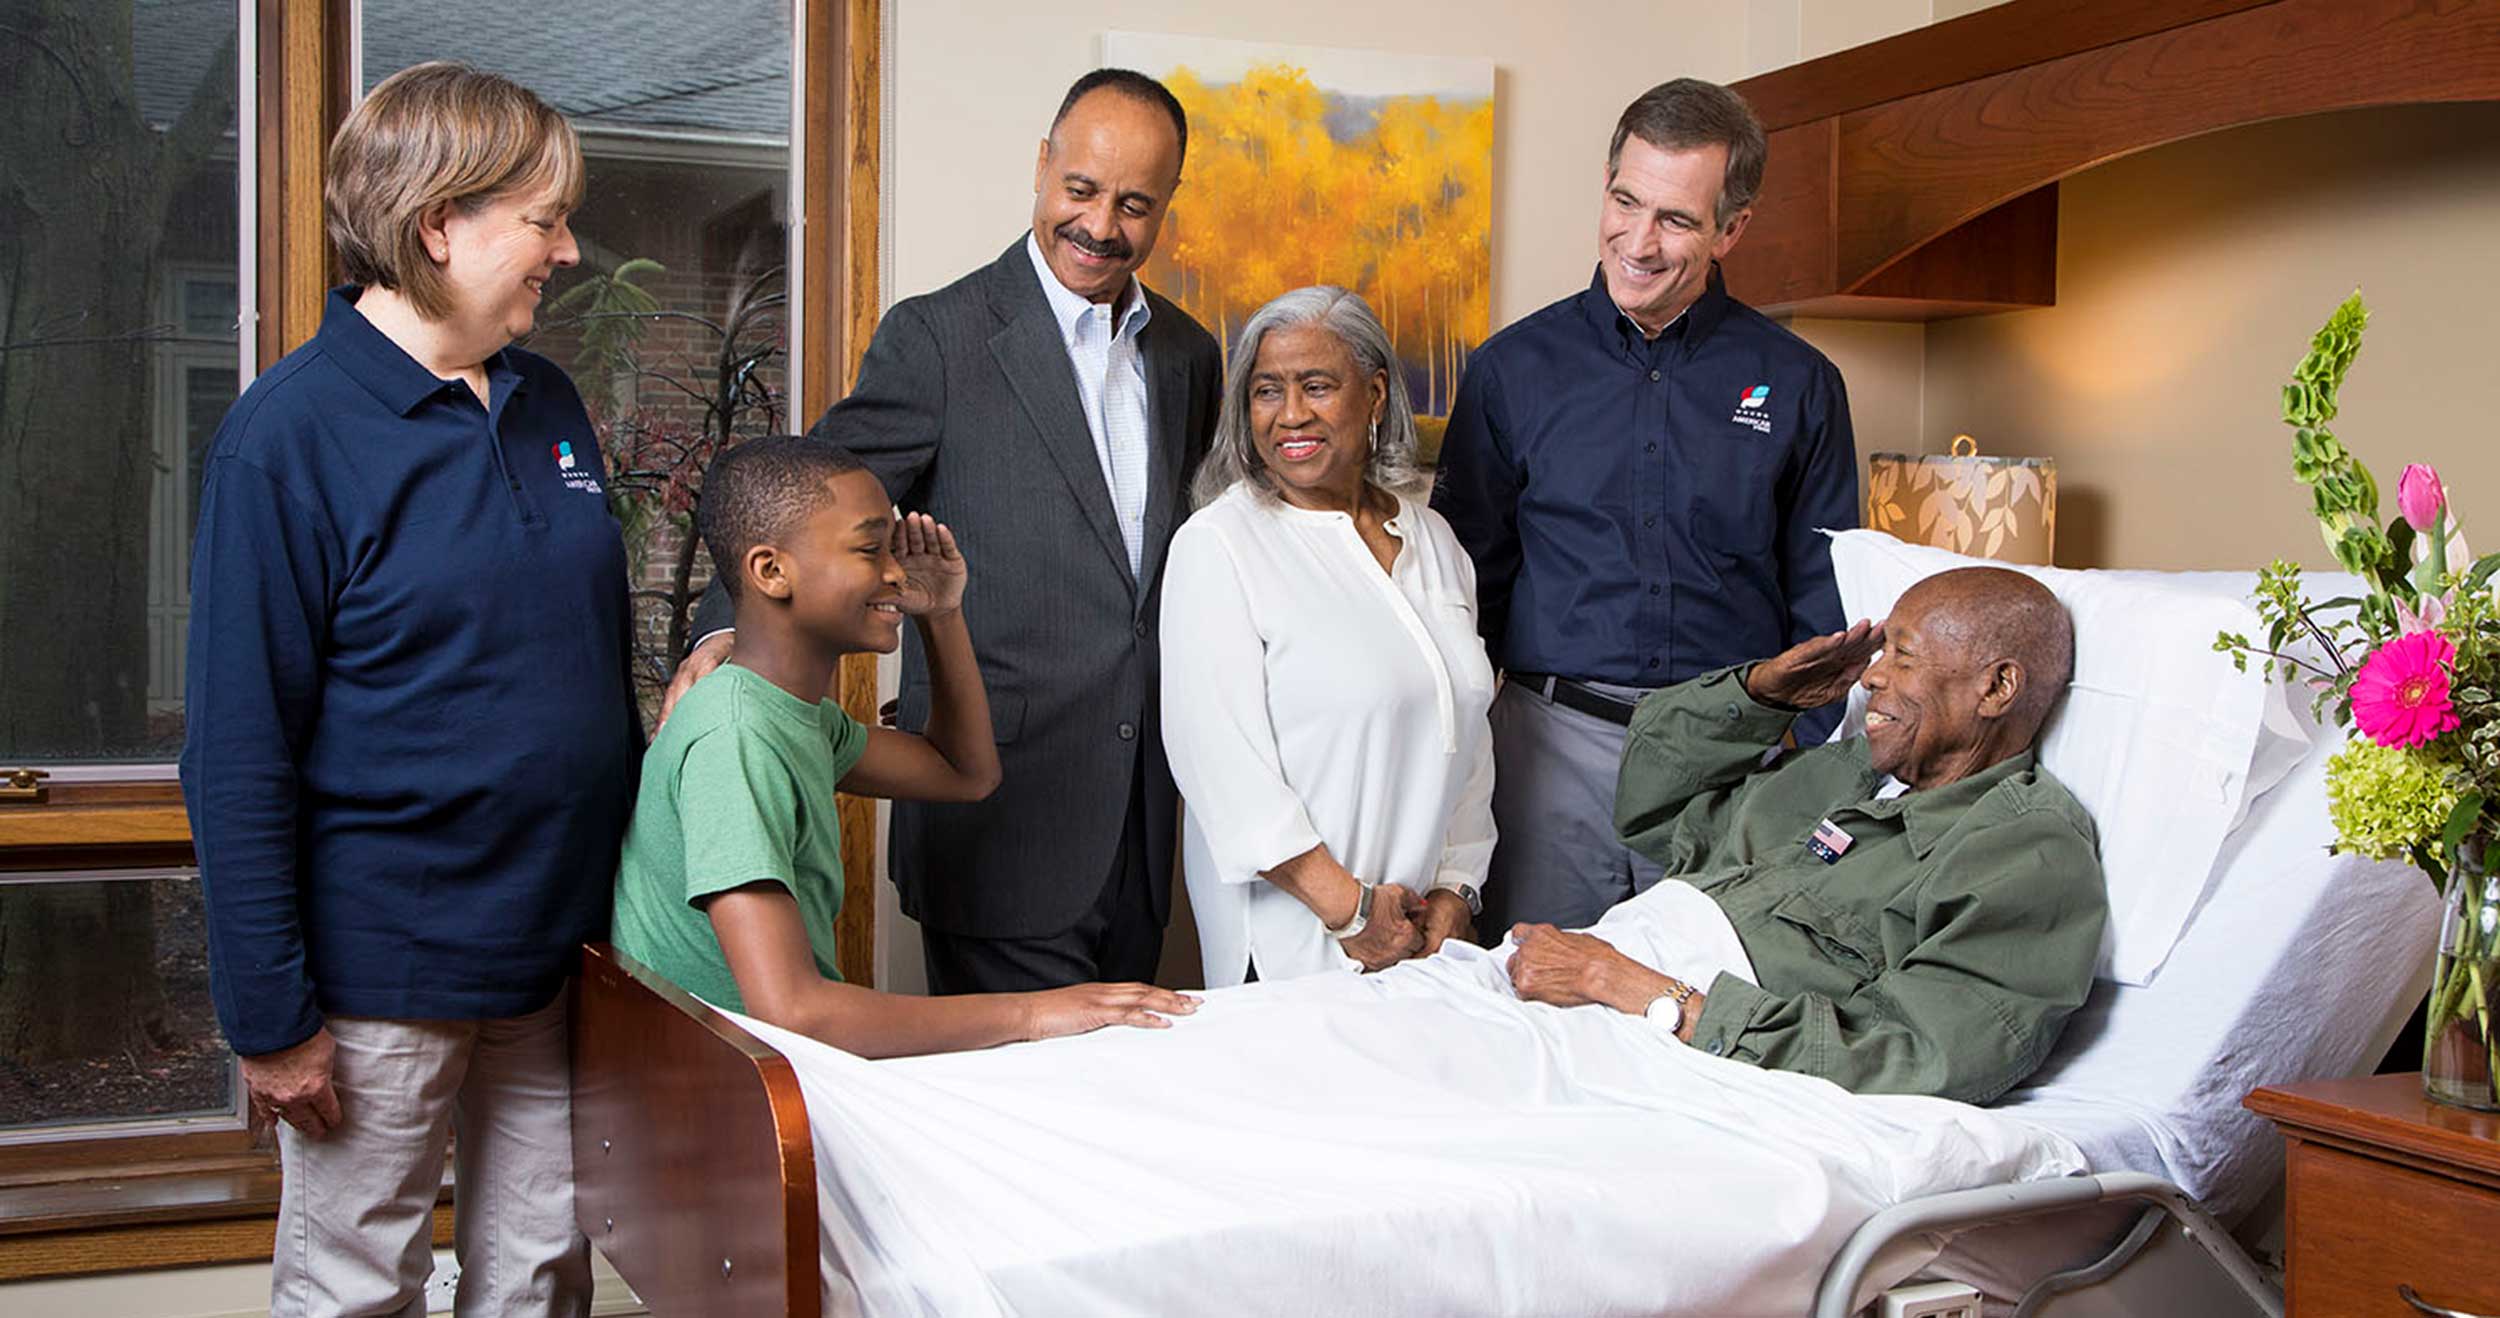 Veteran patient with his family